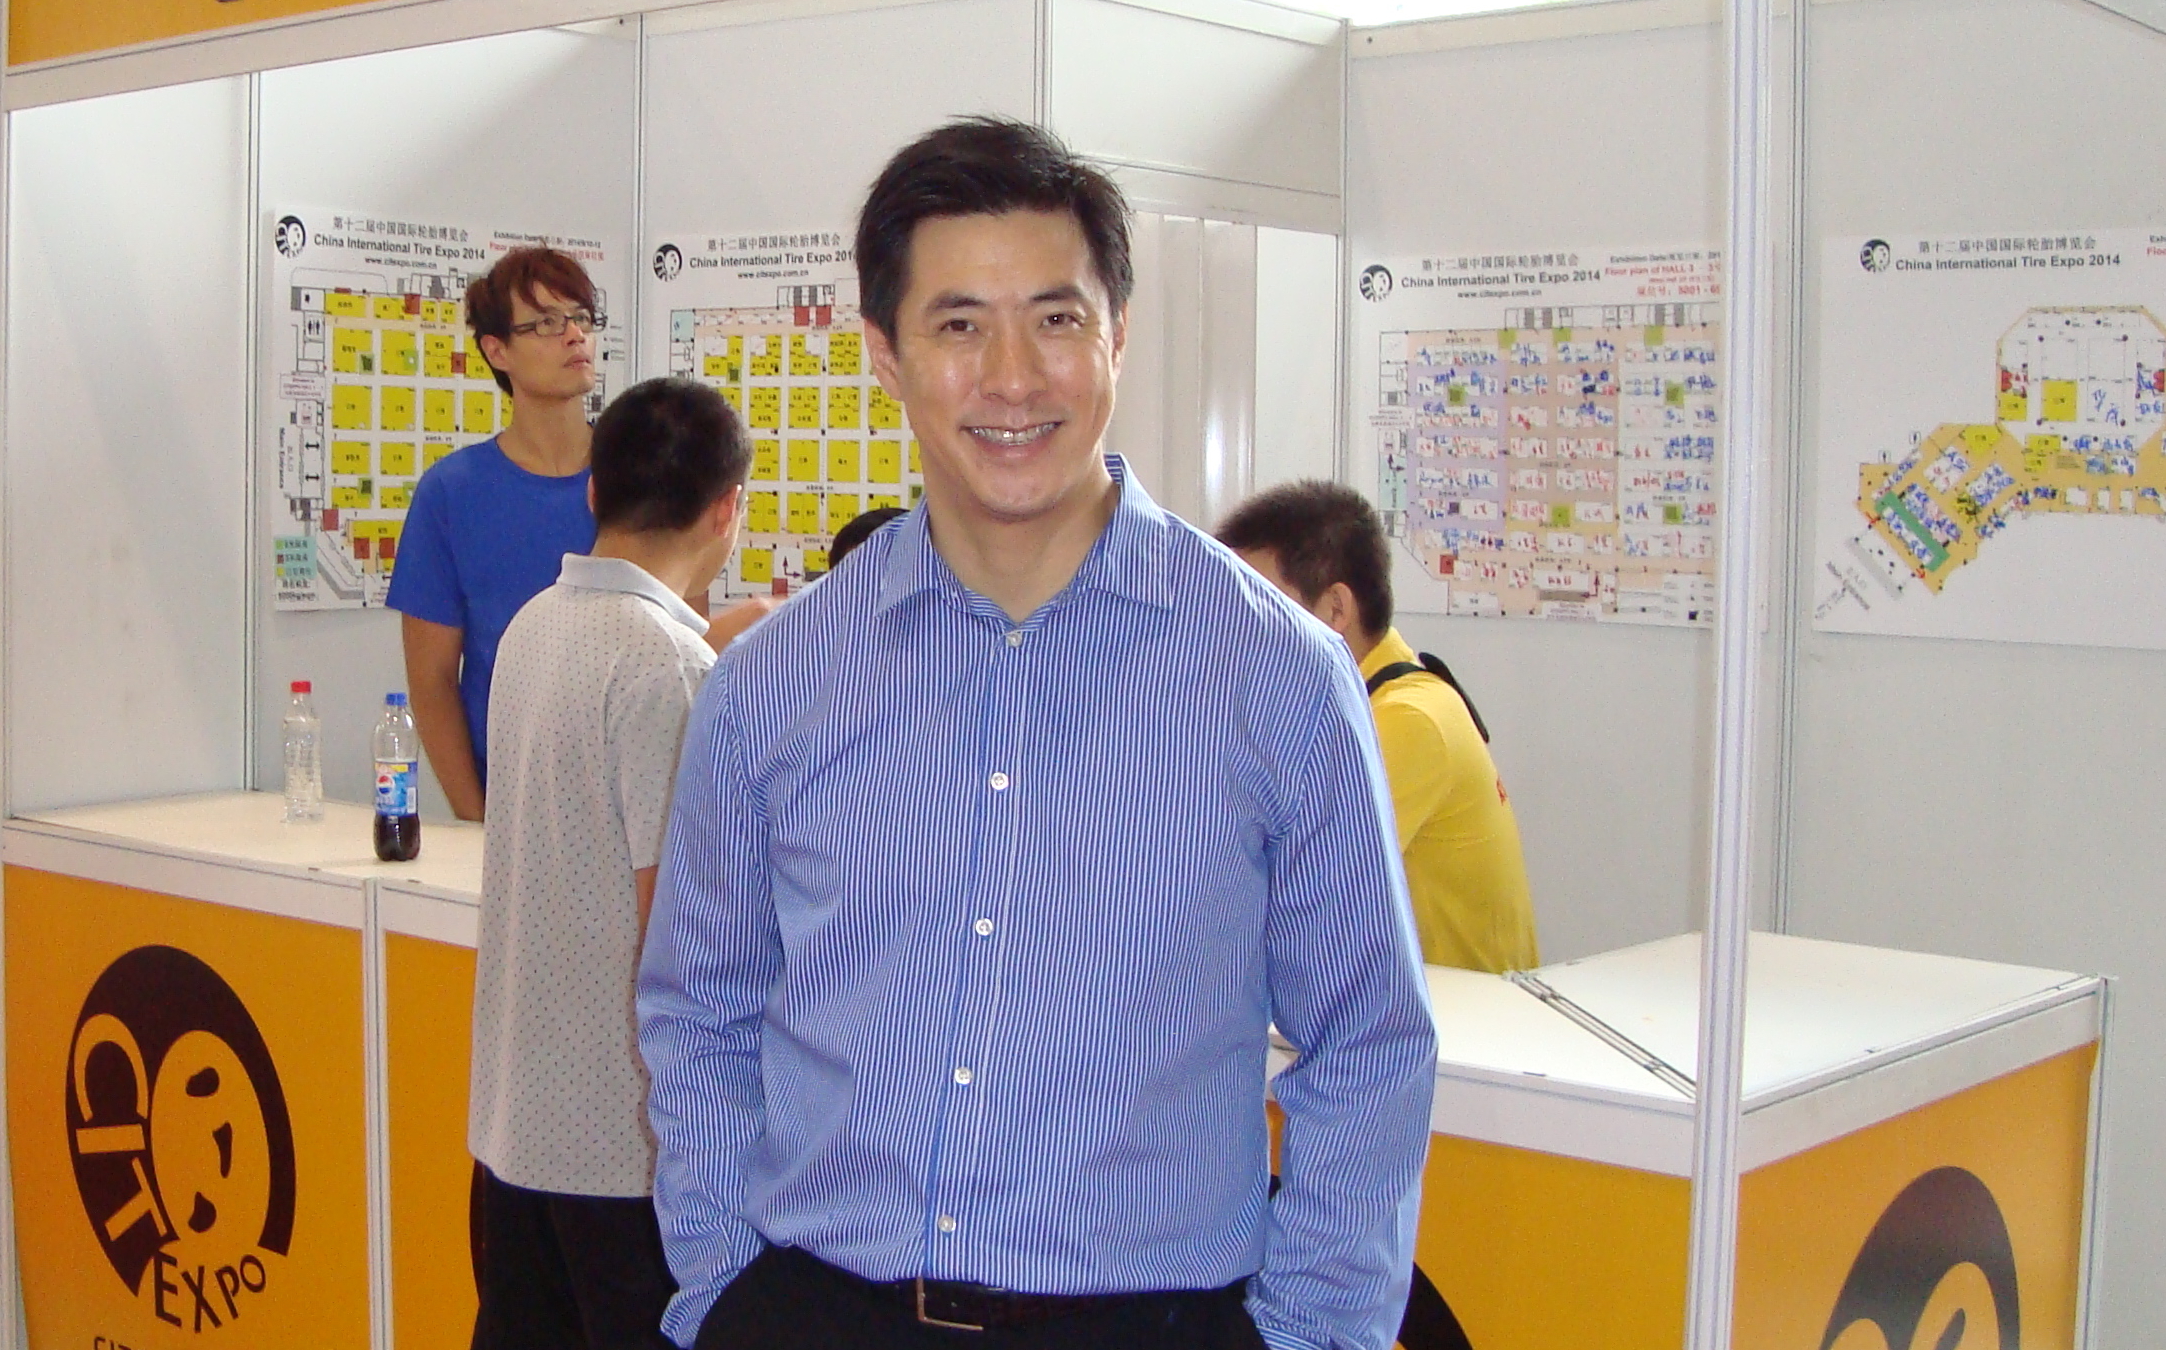 CITExpo 2015 to bid farewell to Everbright with largest edition projected